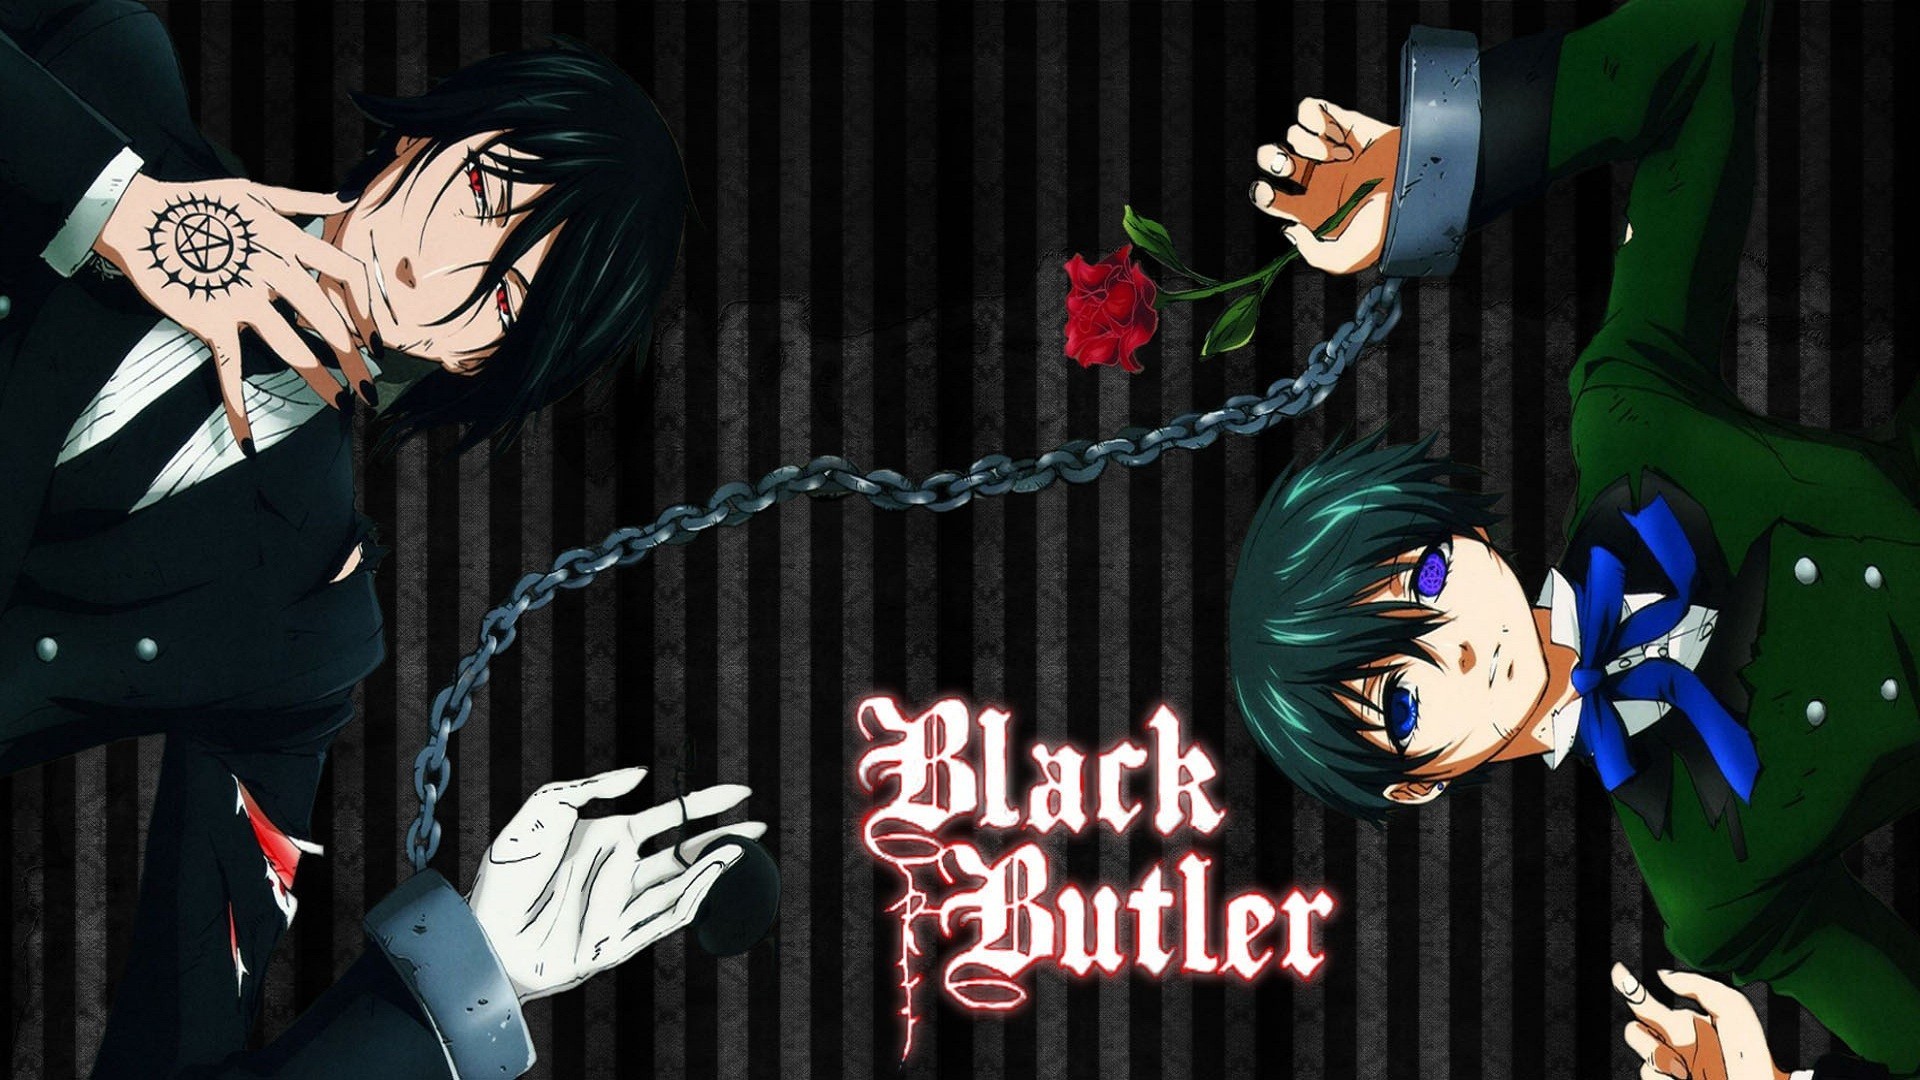 Black Butler Image - ID: 162719 - Image Abyss.